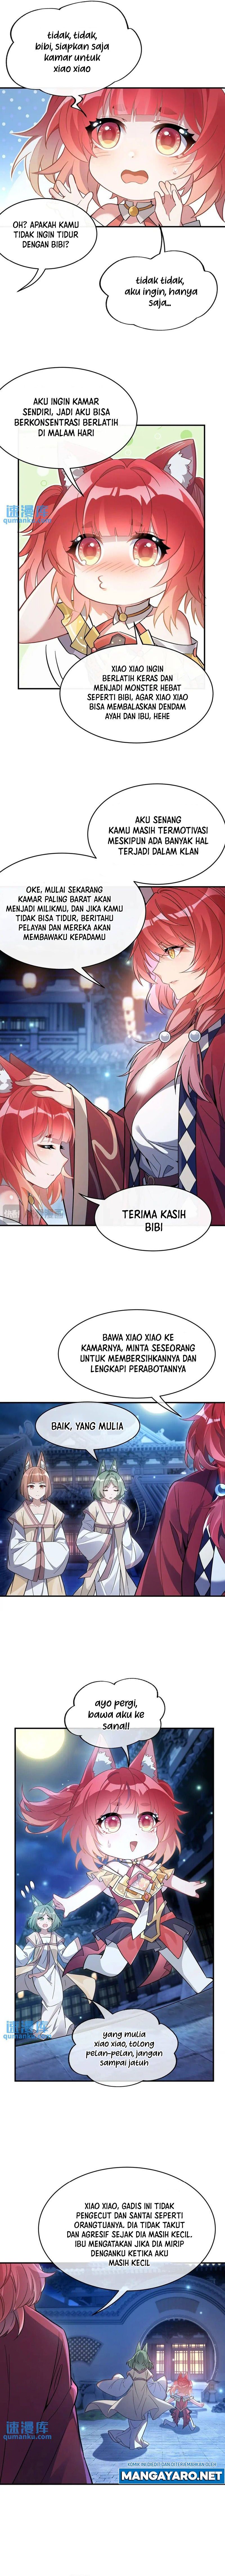 Dilarang COPAS - situs resmi www.mangacanblog.com - Komik my female apprentices are all big shots from the future 210 - chapter 210 211 Indonesia my female apprentices are all big shots from the future 210 - chapter 210 Terbaru 4|Baca Manga Komik Indonesia|Mangacan